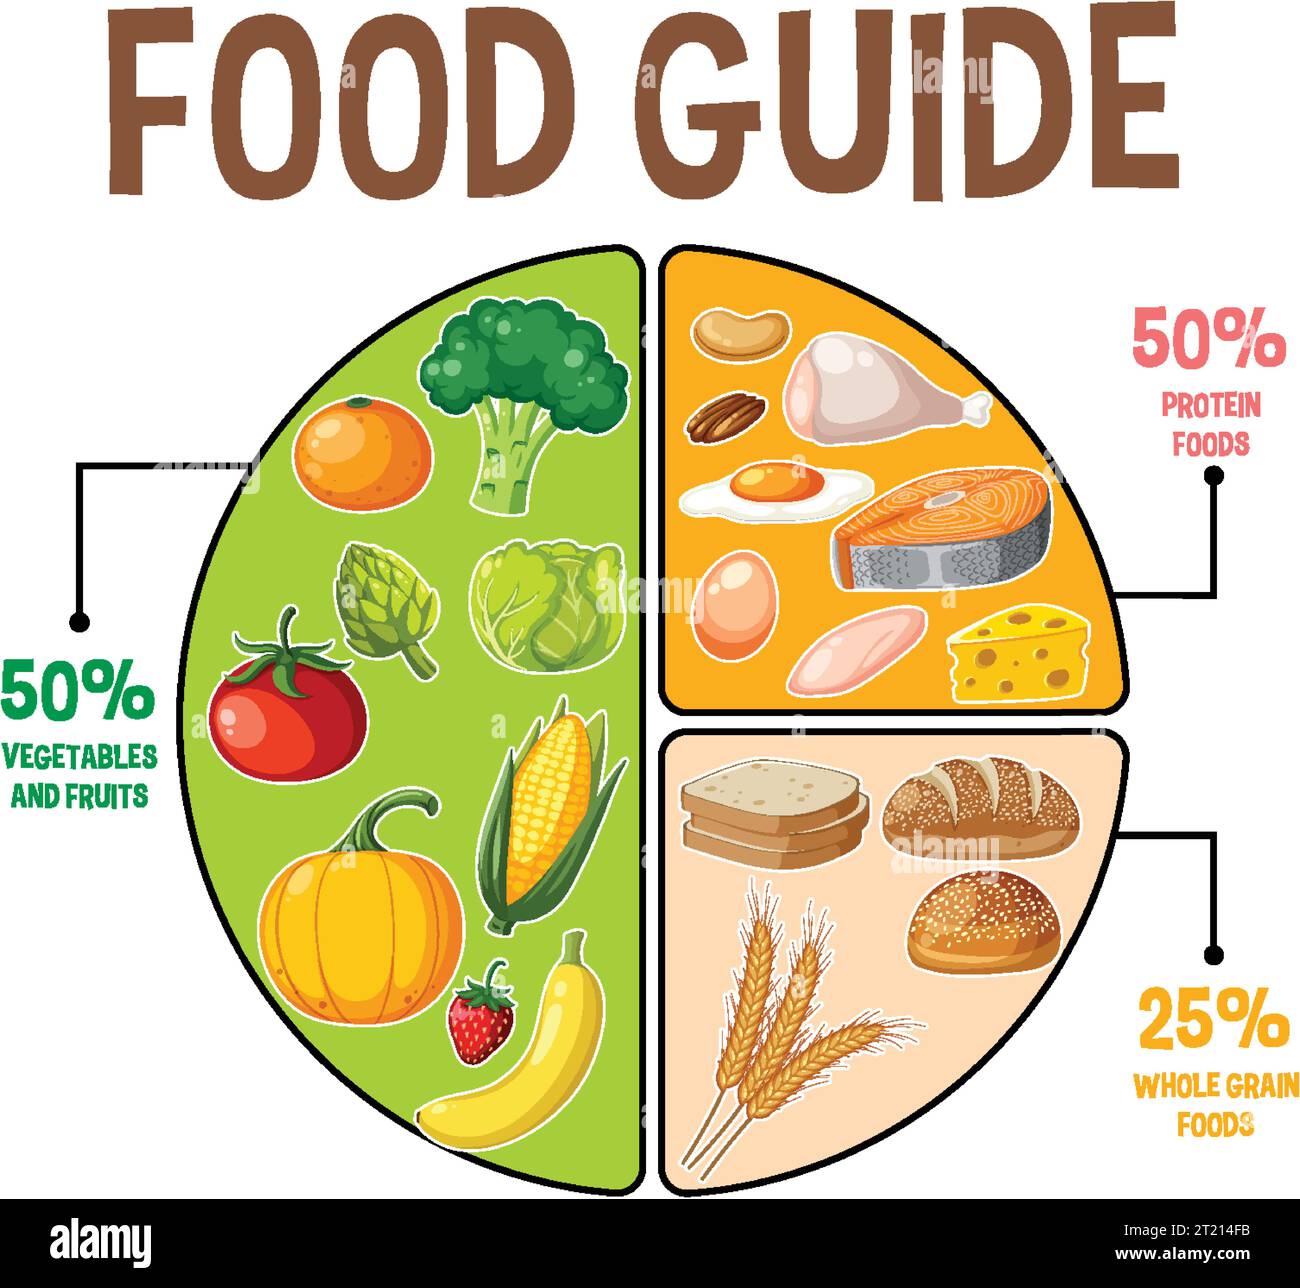 Illustration of a circle divided into different macronutrients for a ...